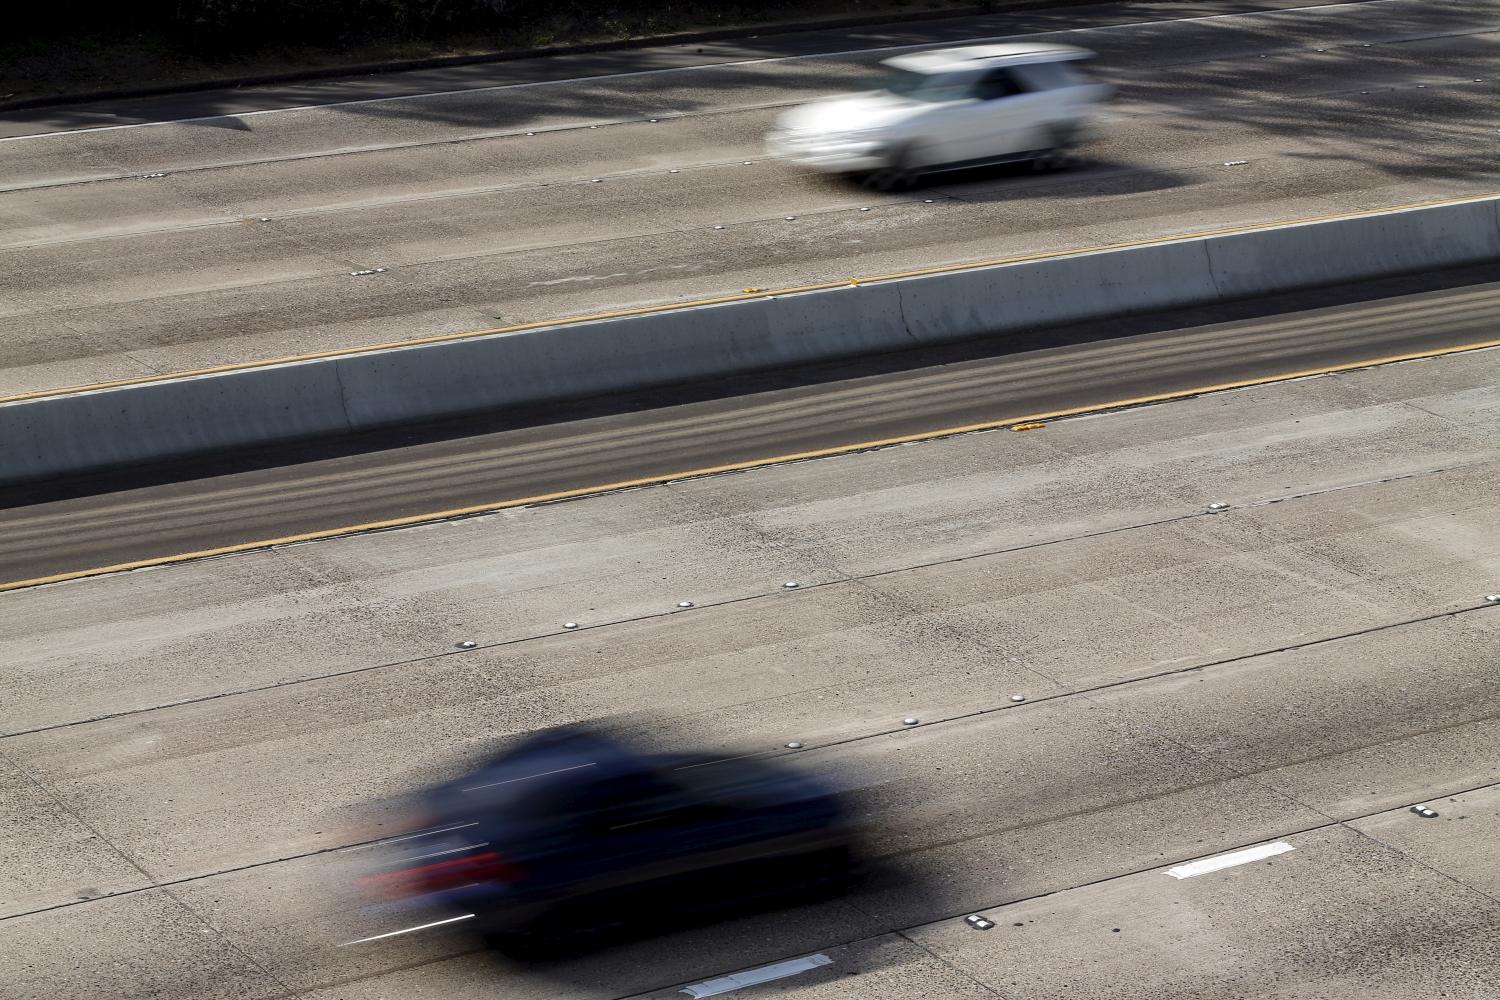 Cars travel on roads lacking painted freeway lane markers on Interstate highway 5 in San Diego, California February 10, 2016.